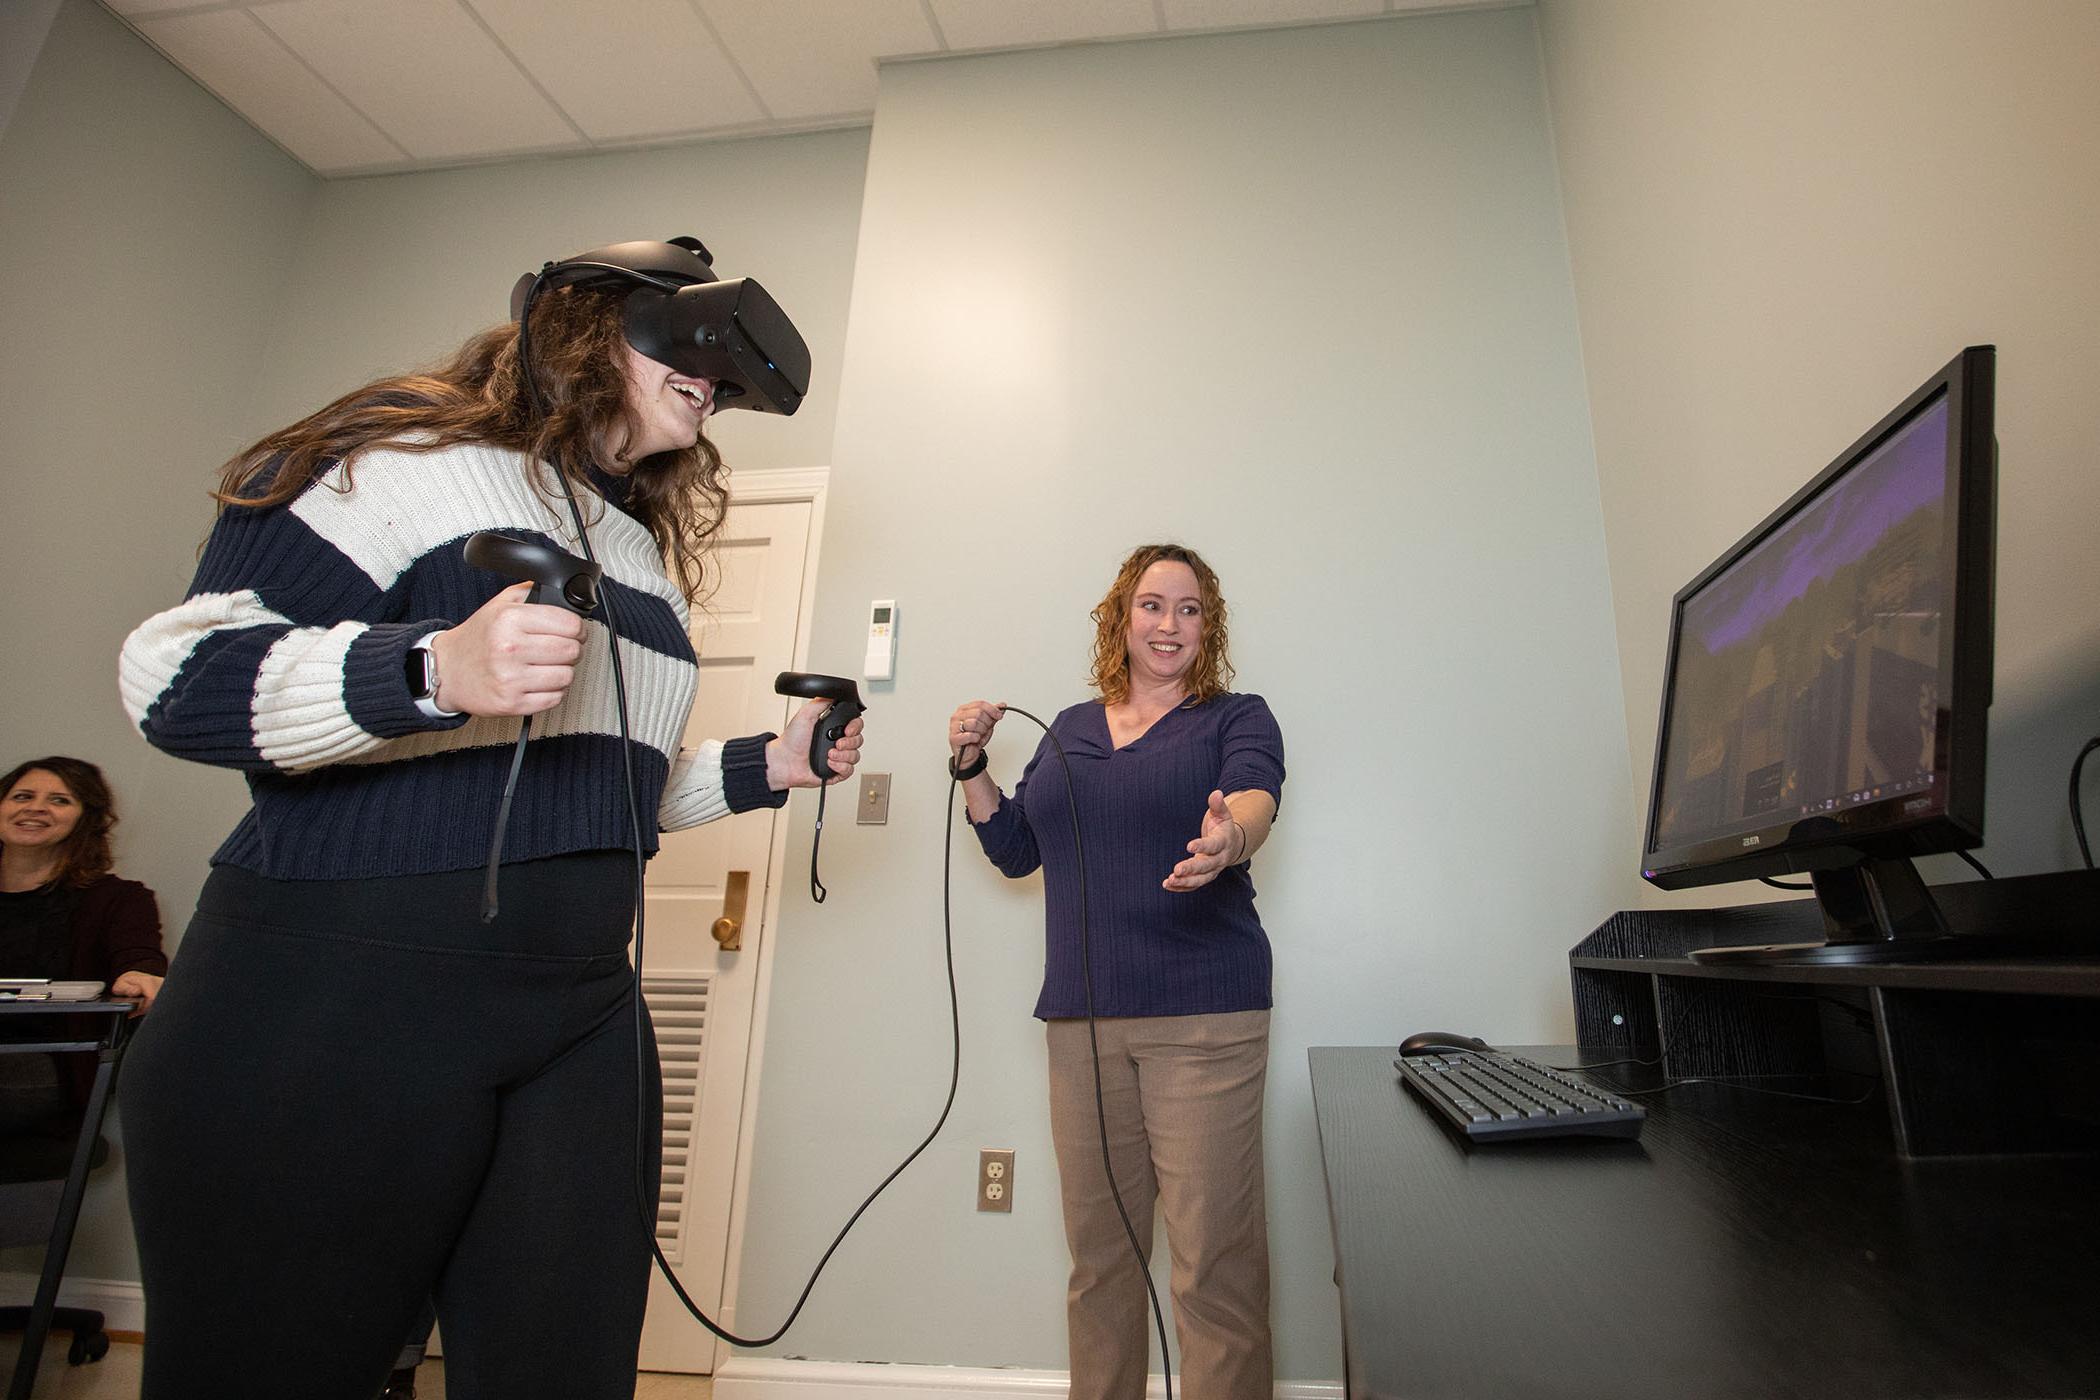 High tech virtual reality equipment is available for psychology studies and experiments.